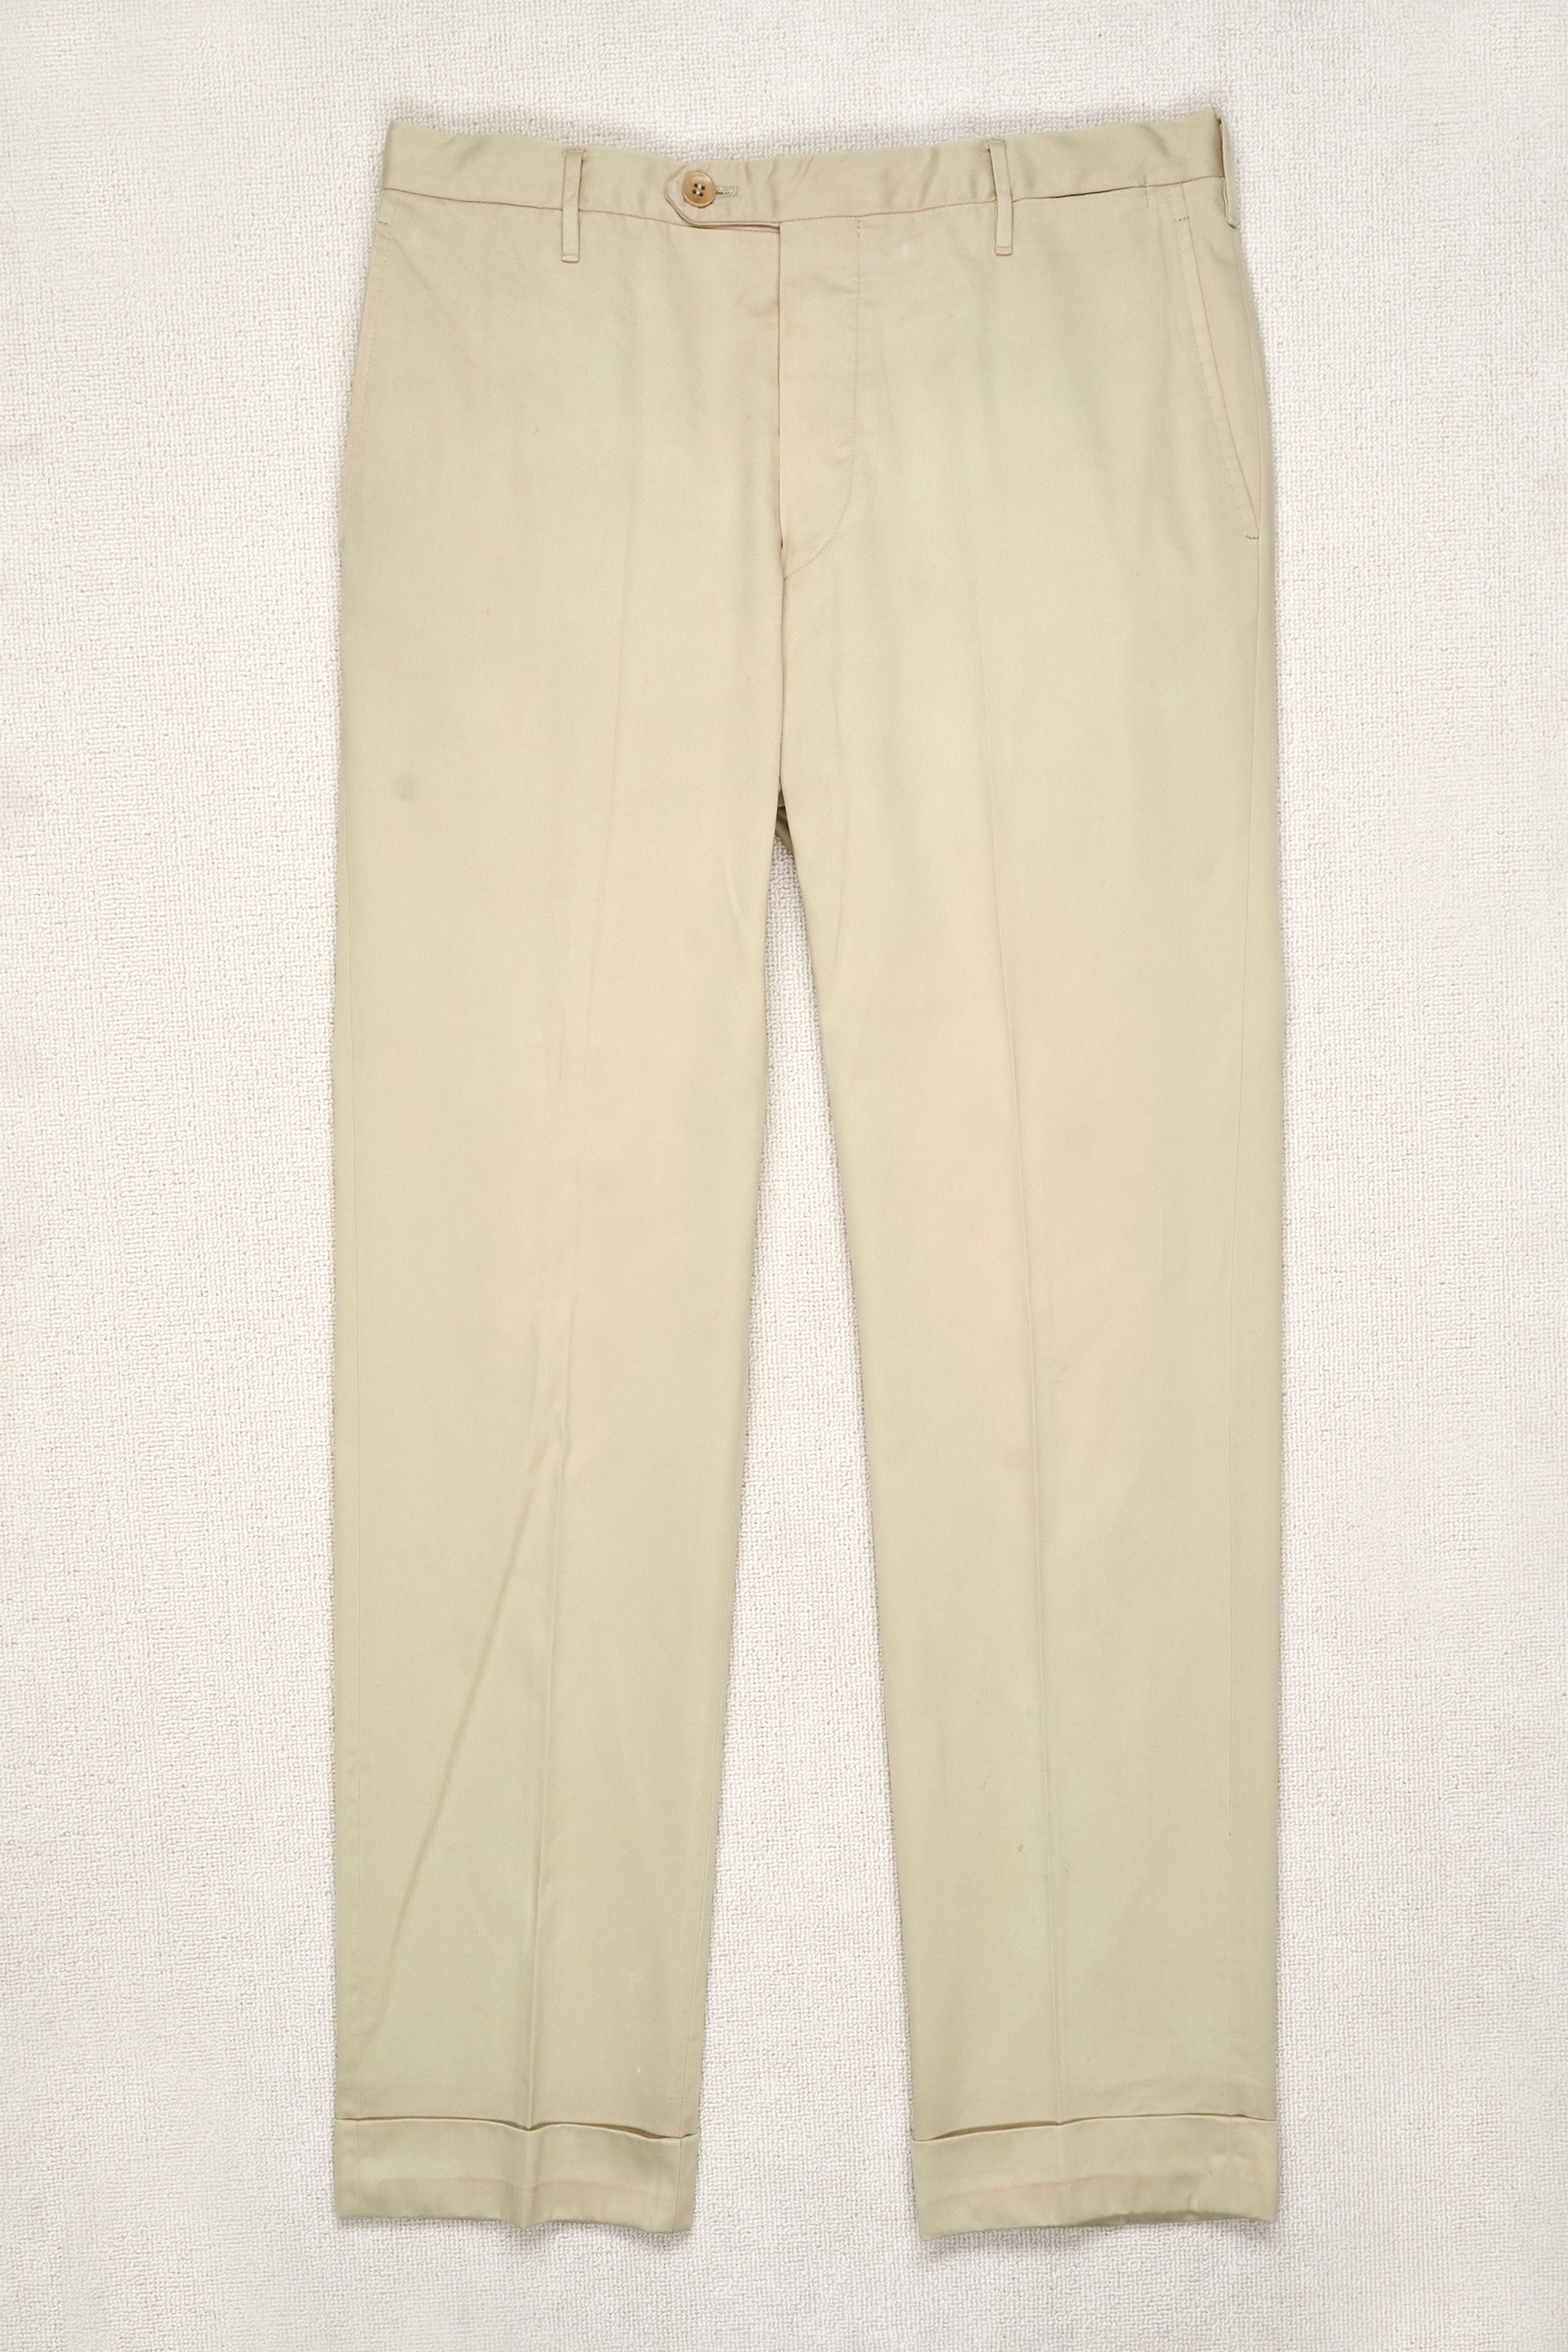 Rota Beige Cotton Flat Front Trousers